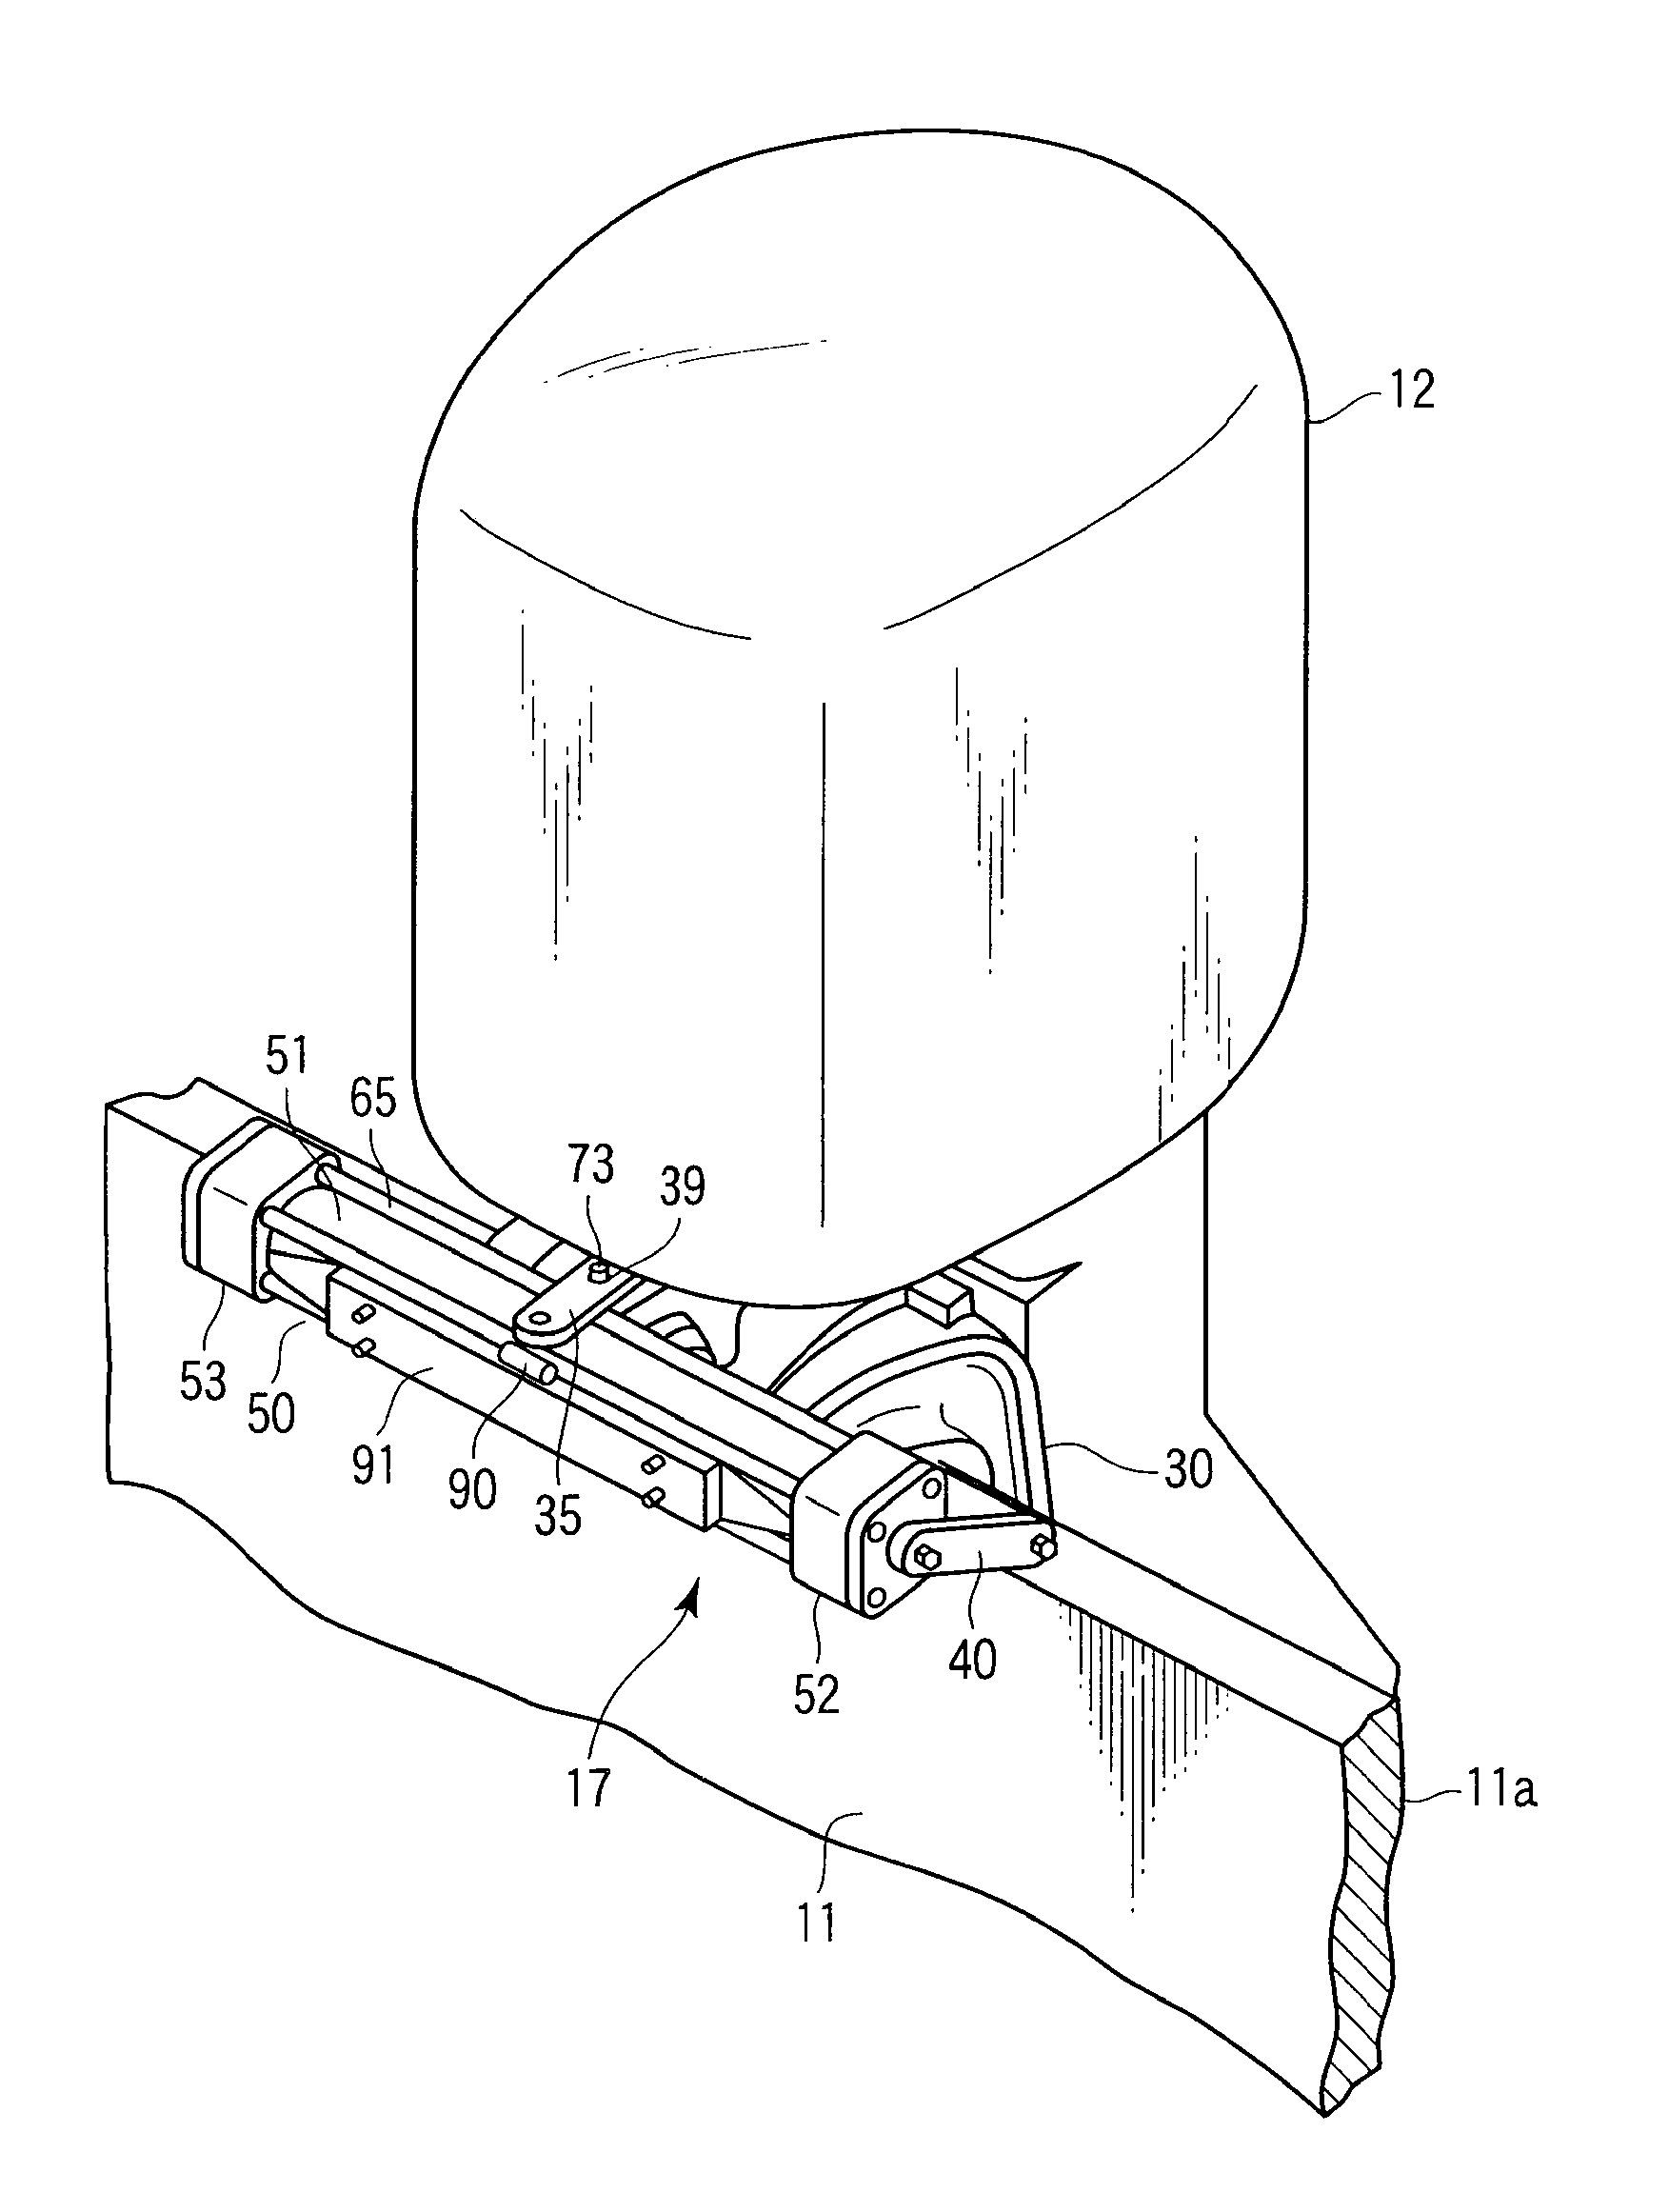 Steering apparatus for outboard motor